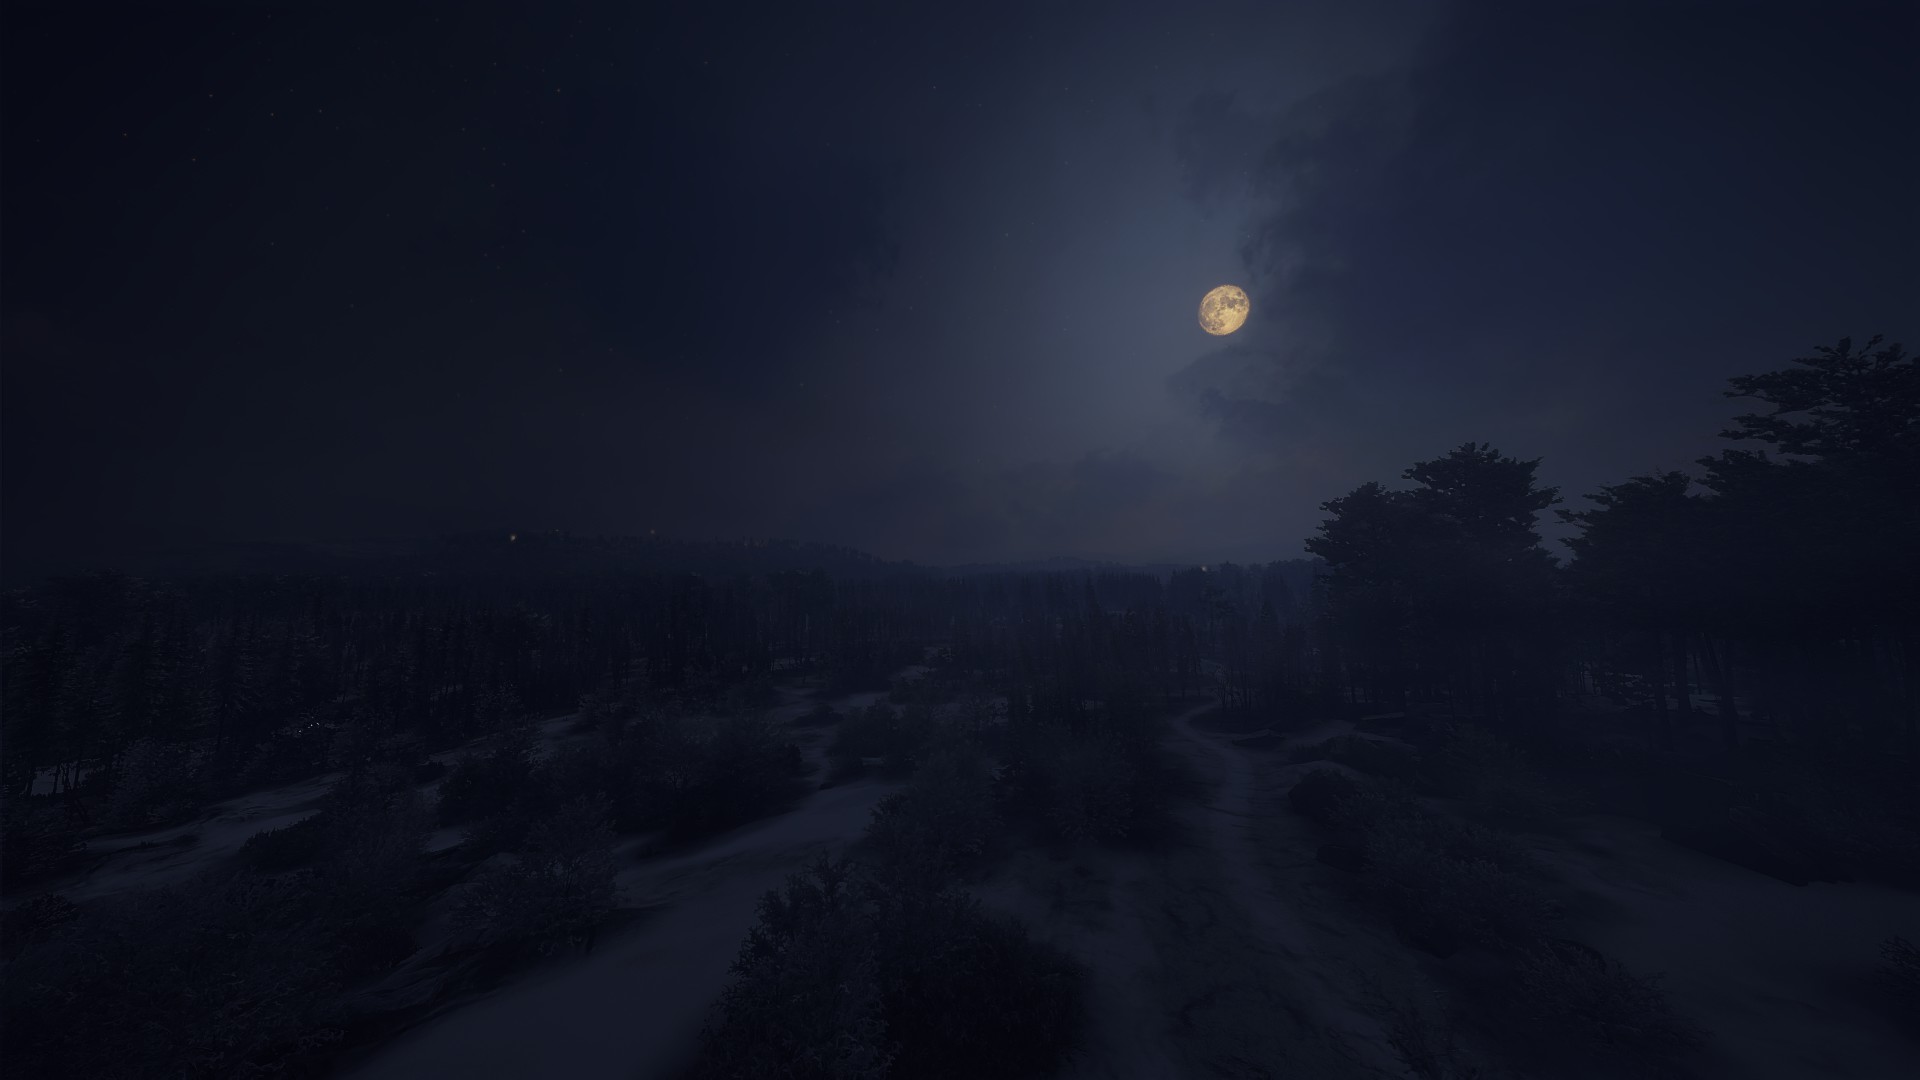 TheHunter Call Of The Wild Screen Shot Wilderness Trees Landscape Snow Night Clouds Video Game Art V 1920x1080